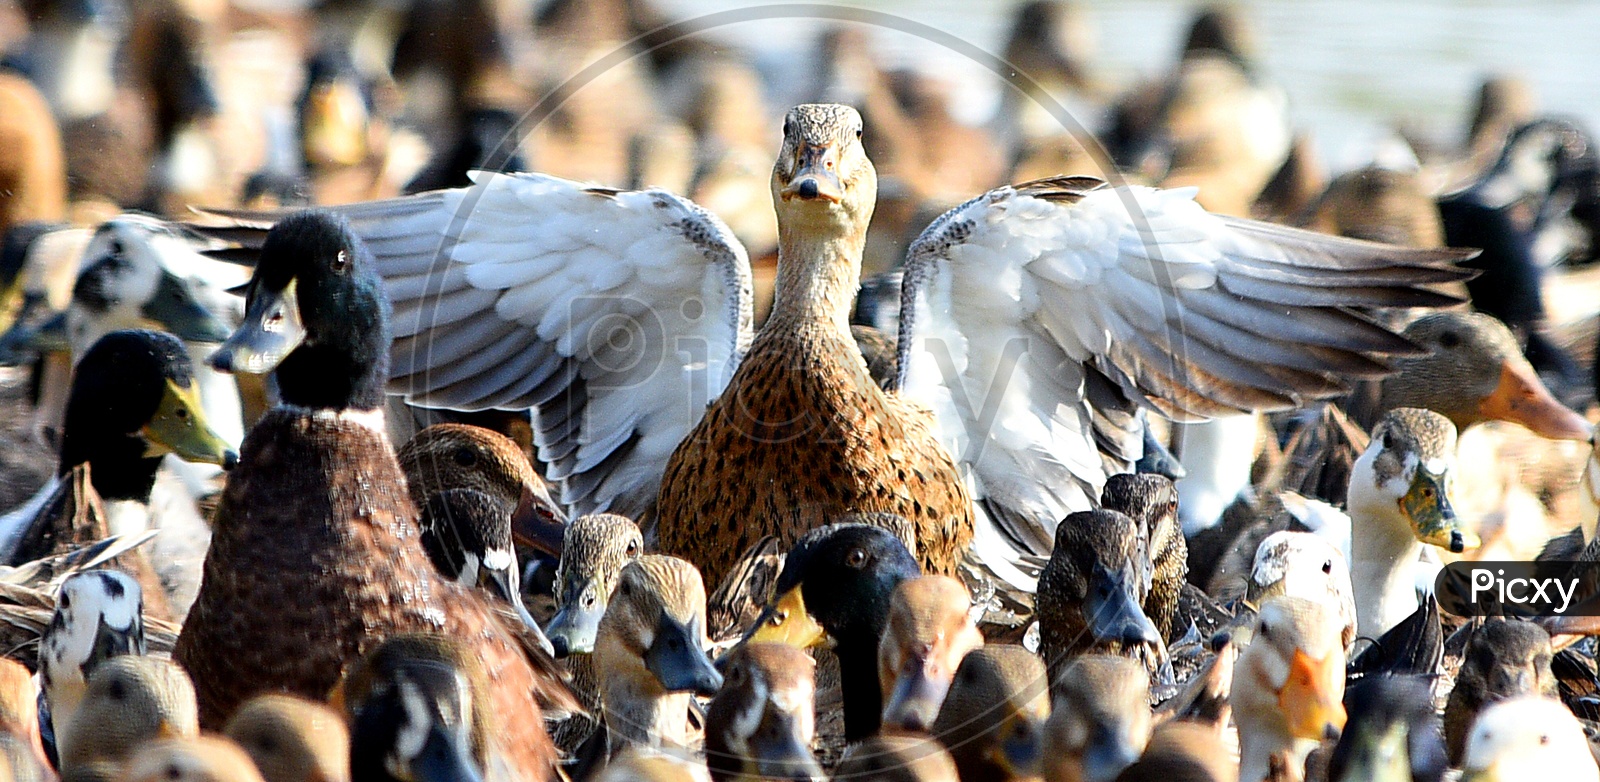 A duck with its wings open among a raft of ducks